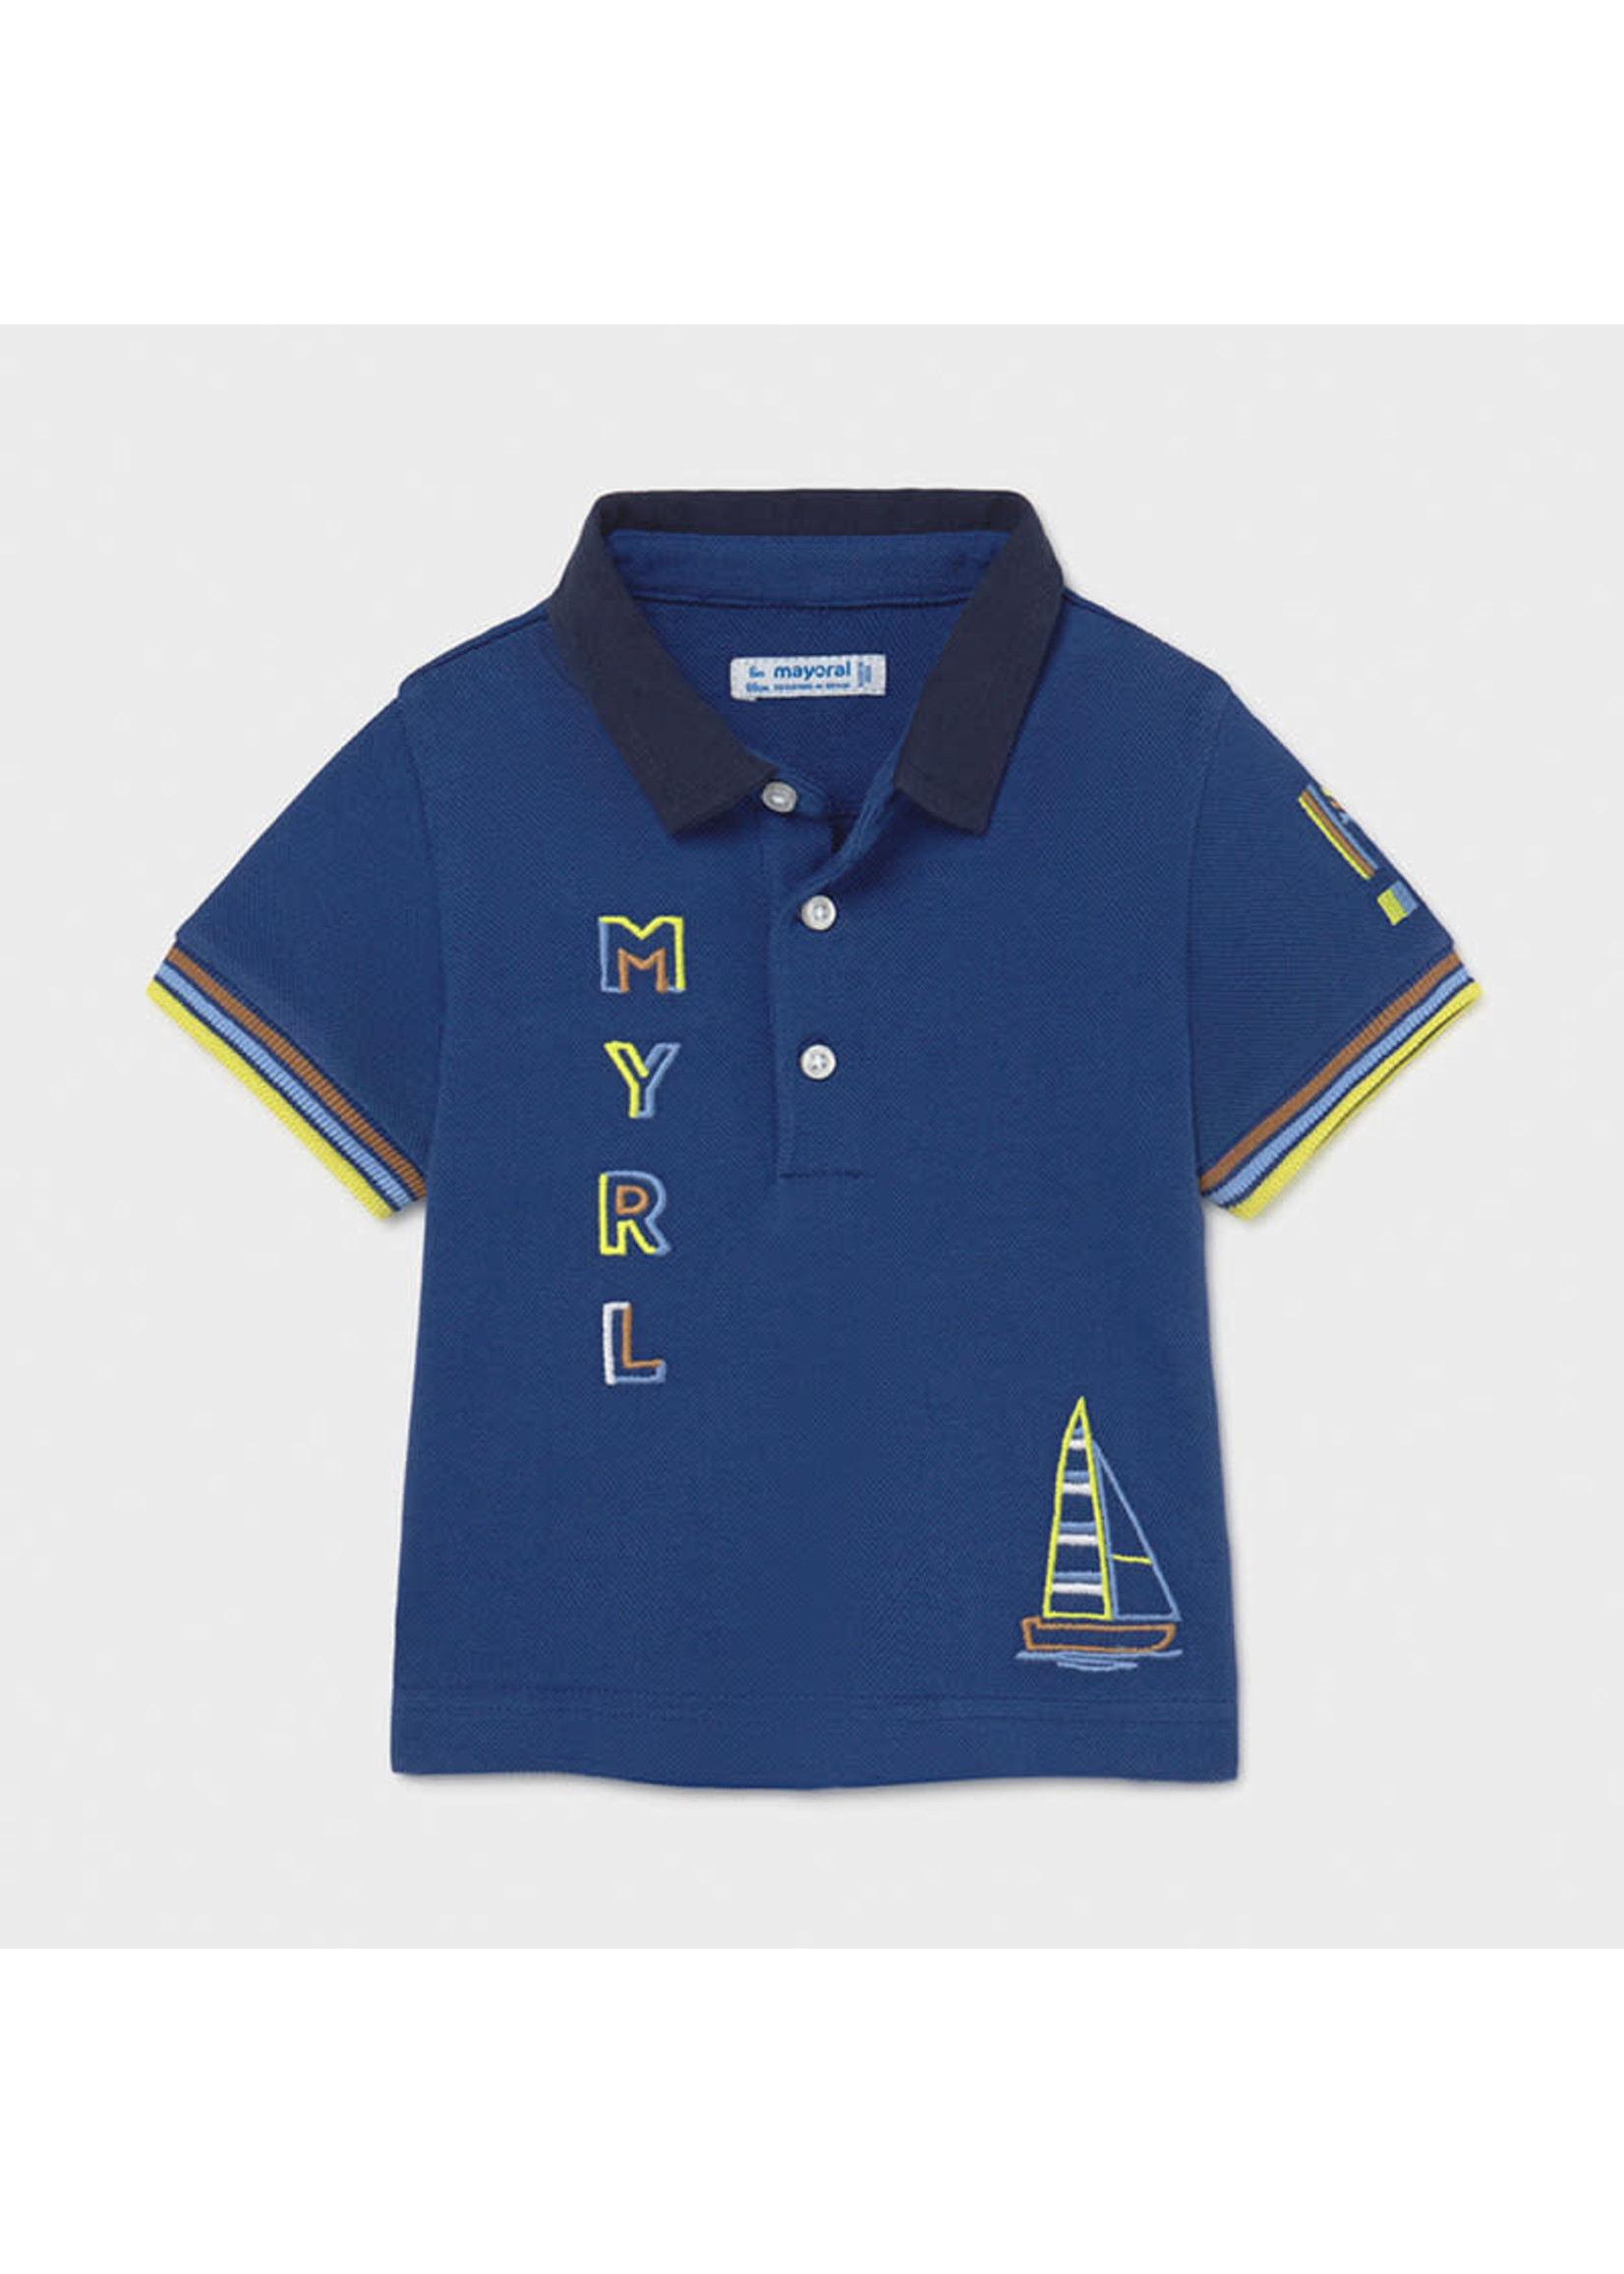 Mayoral Mayoral s/s embroided polo Overseas - 21 01109